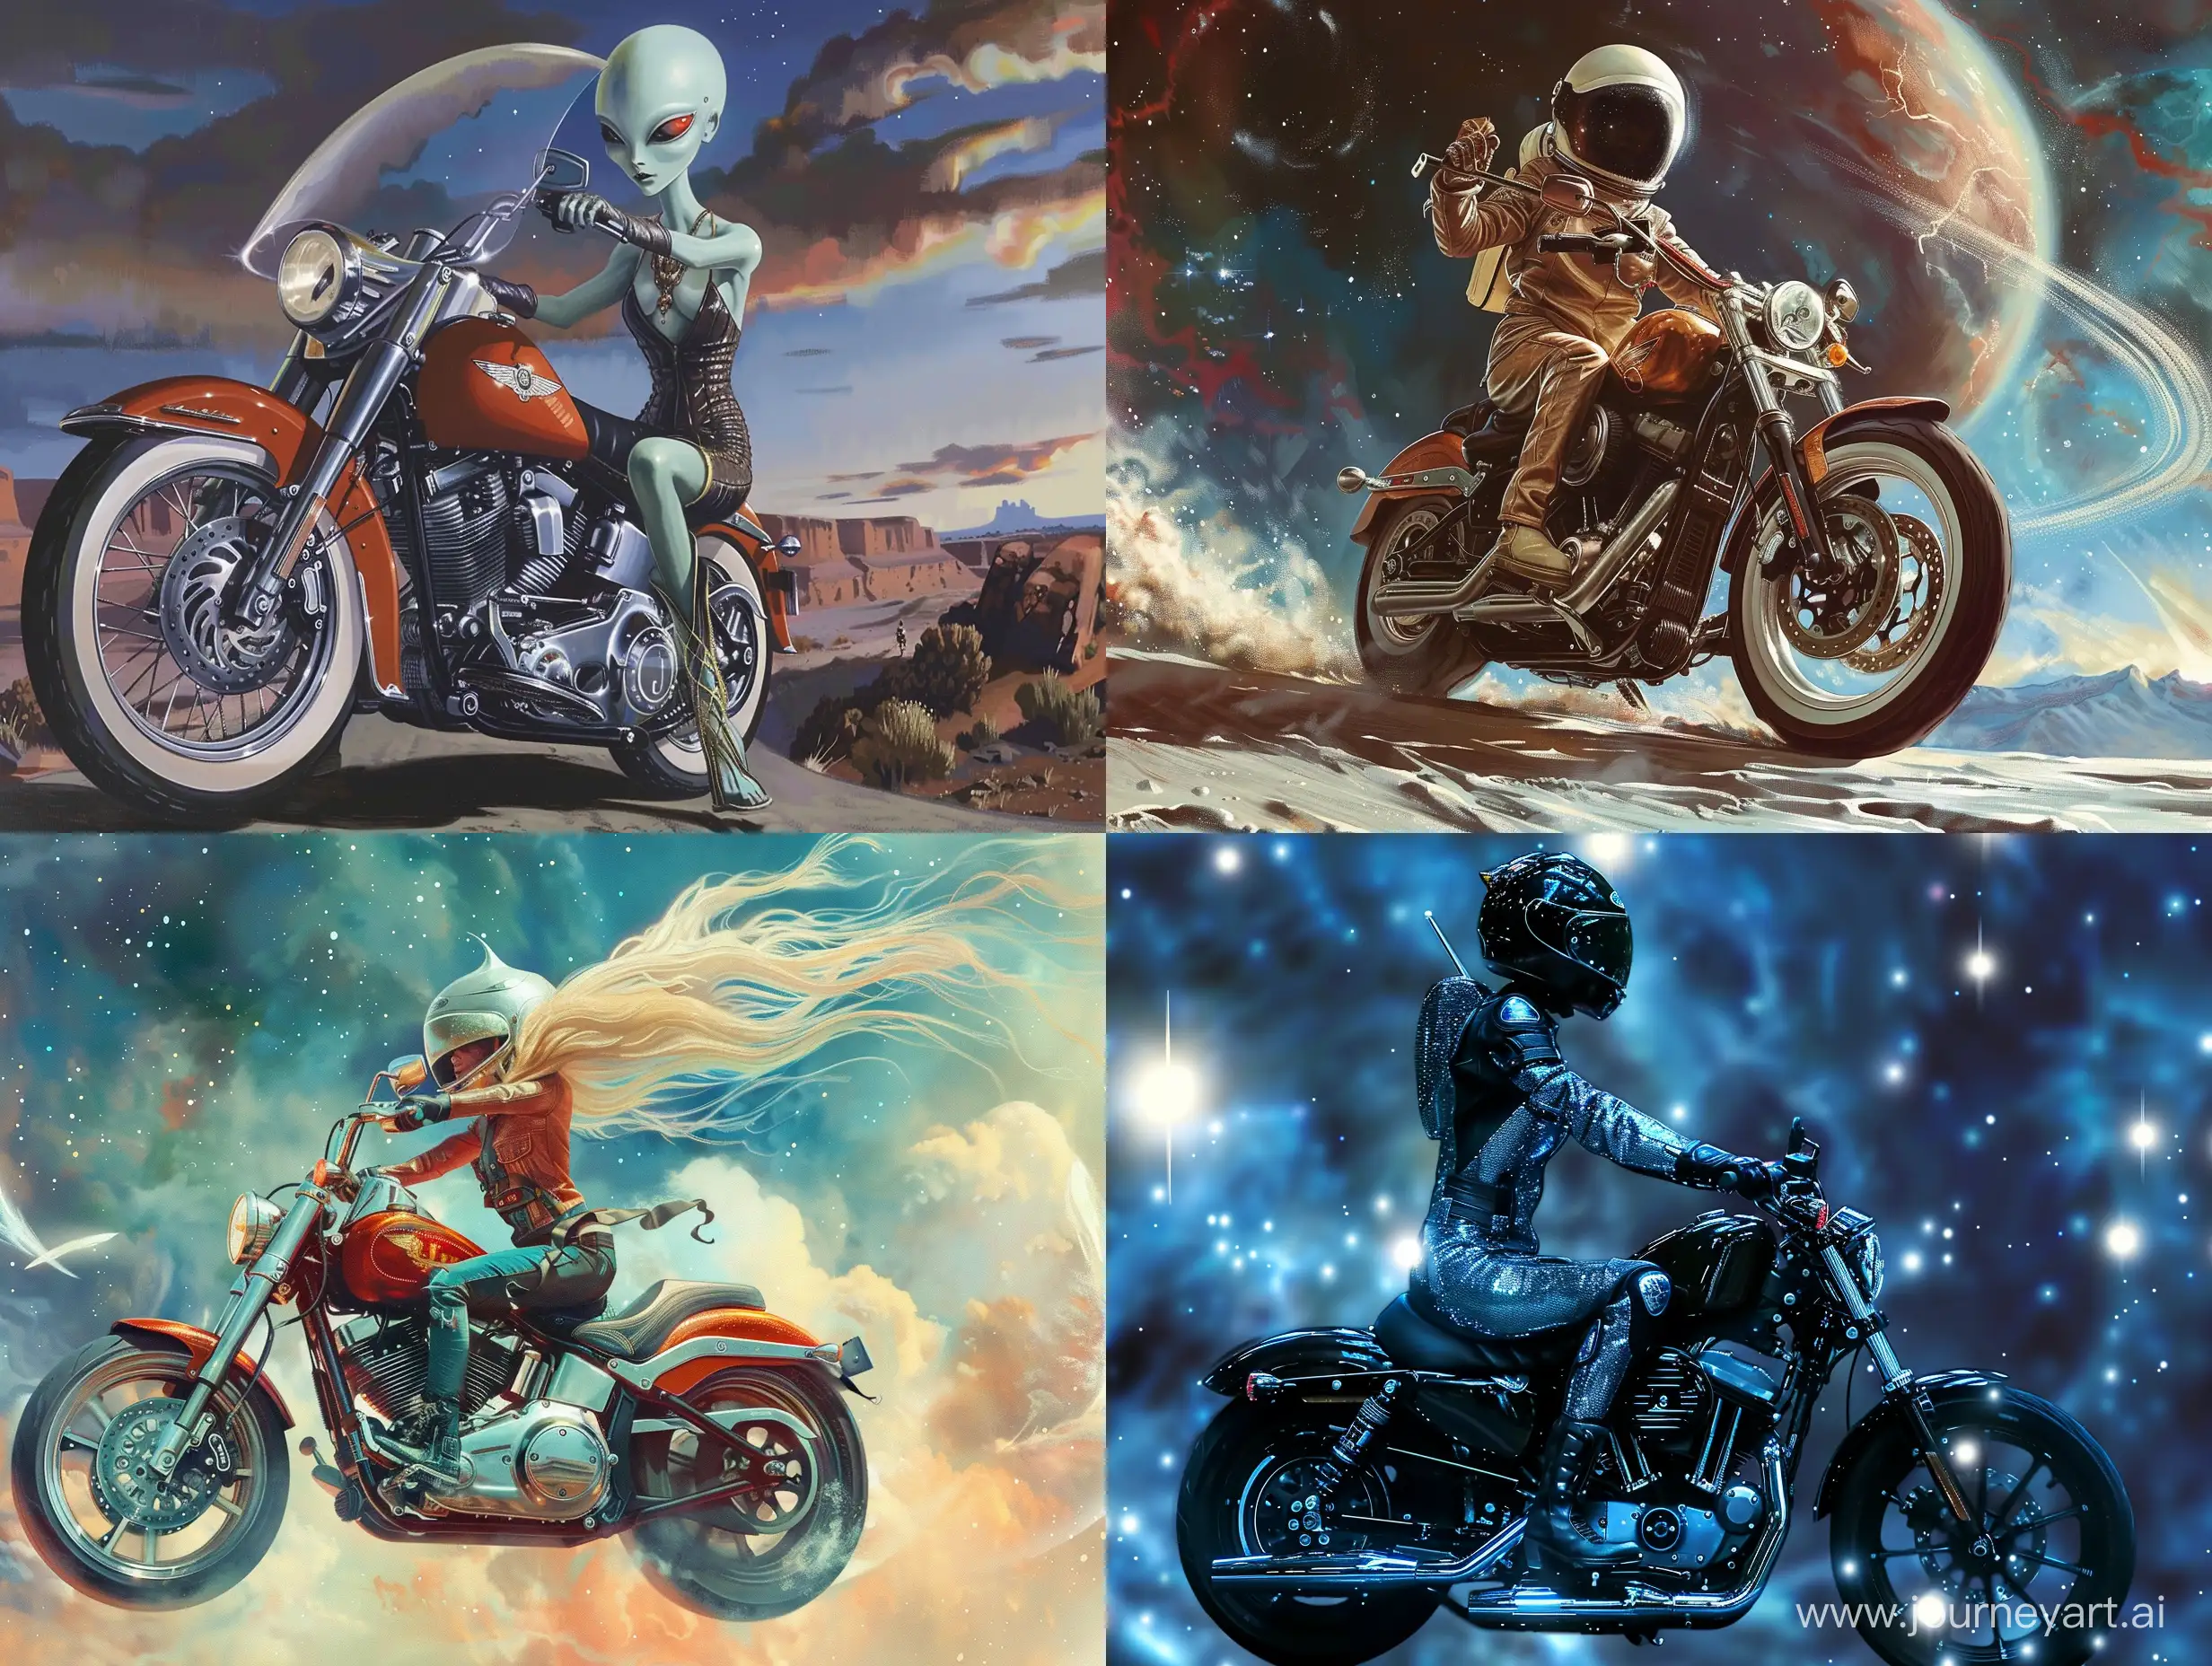 Lam-Riding-Harley-Davidson-in-Space